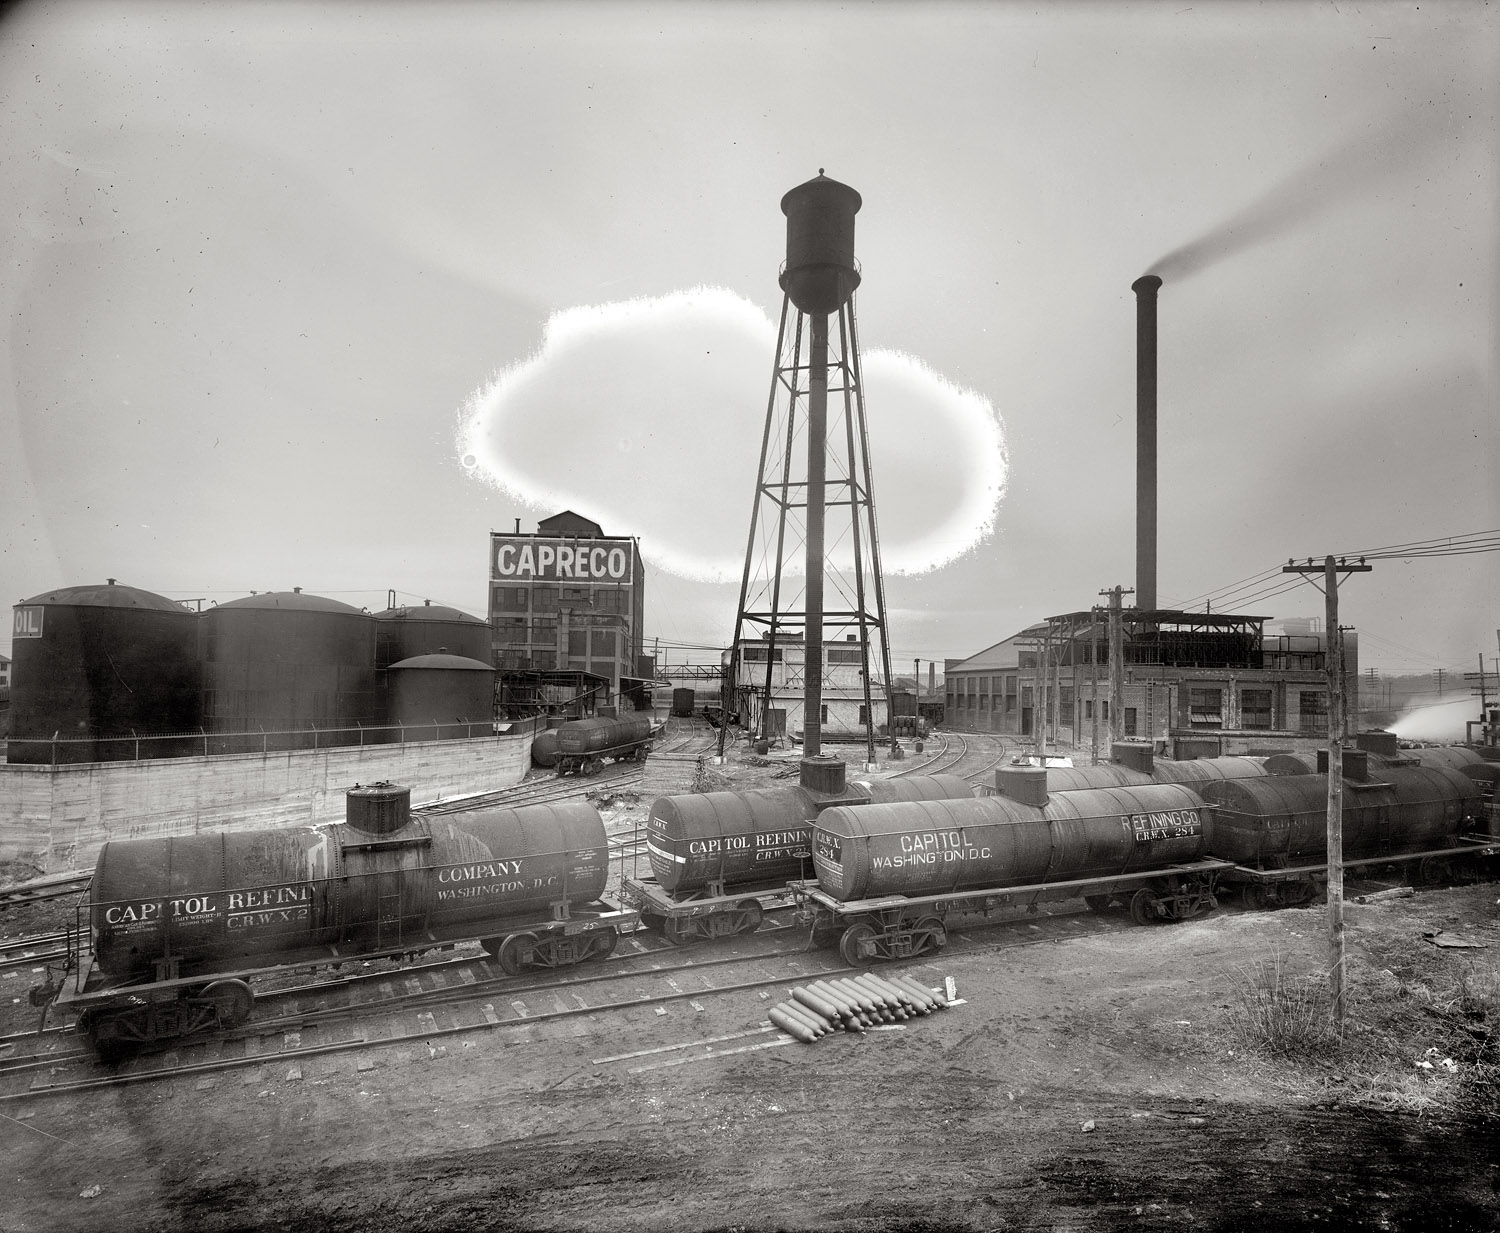 A glimpse at the industrial side of Washington circa 1925, labeled "Capitol Refining Co. plant." This tank farm, where the Pentagon stands today, was described at the time as being in "Relee, Alexandria County, just south of the highway bridge." National Photo Co. Collection glass negative. View full size.